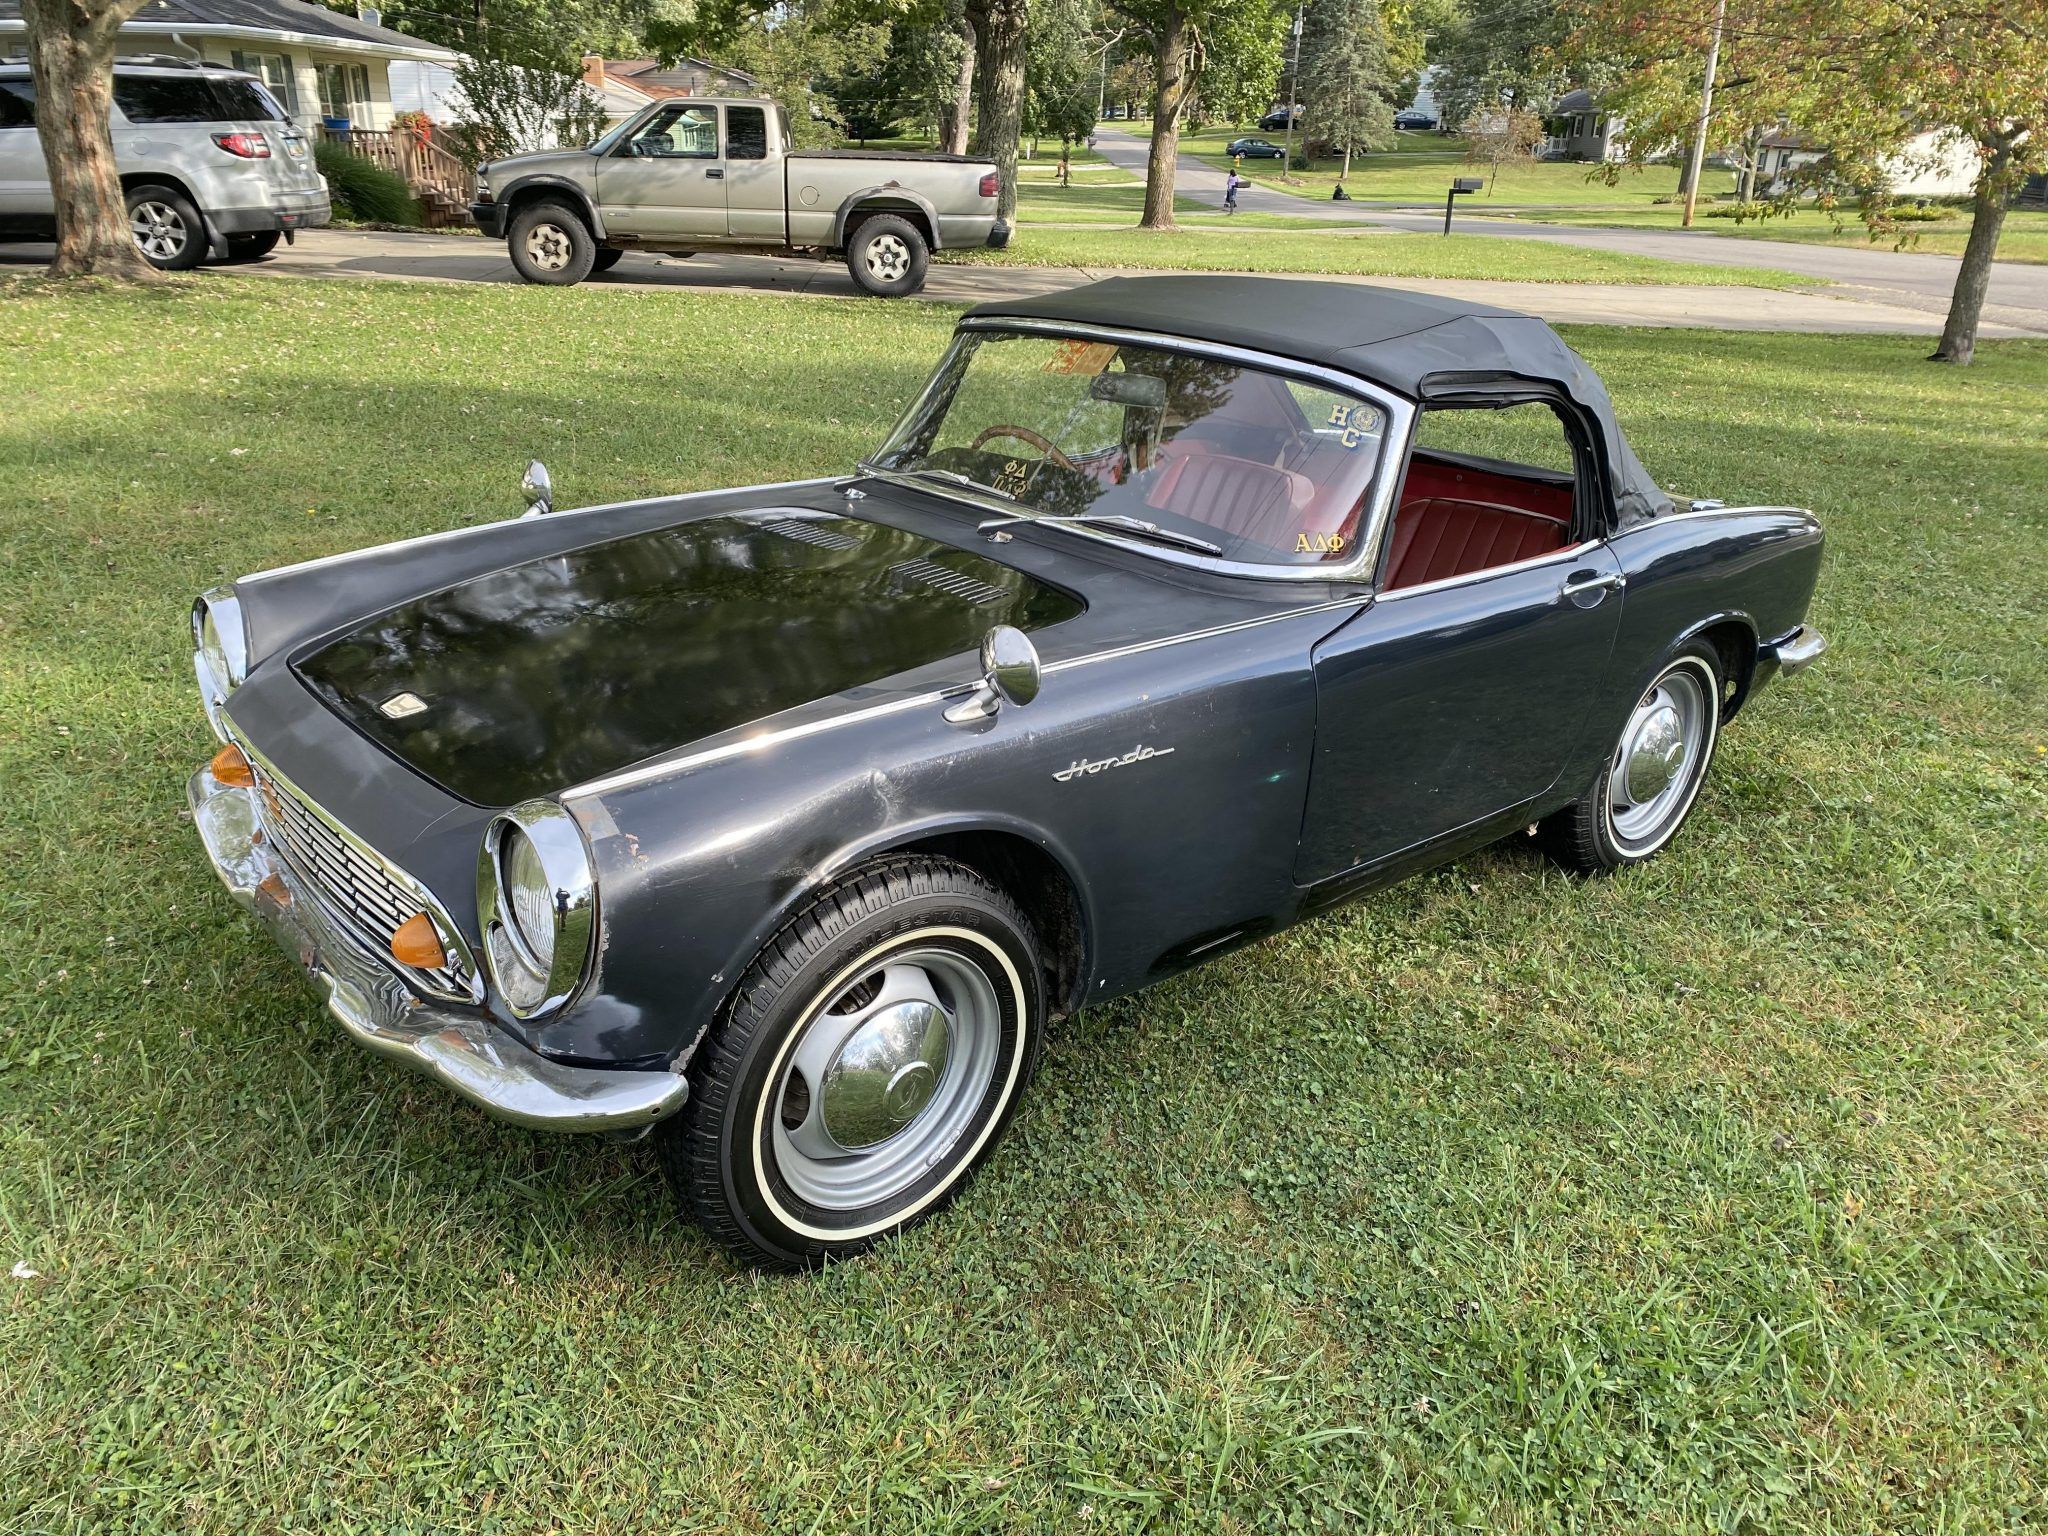 A black Honda S600 with roof up